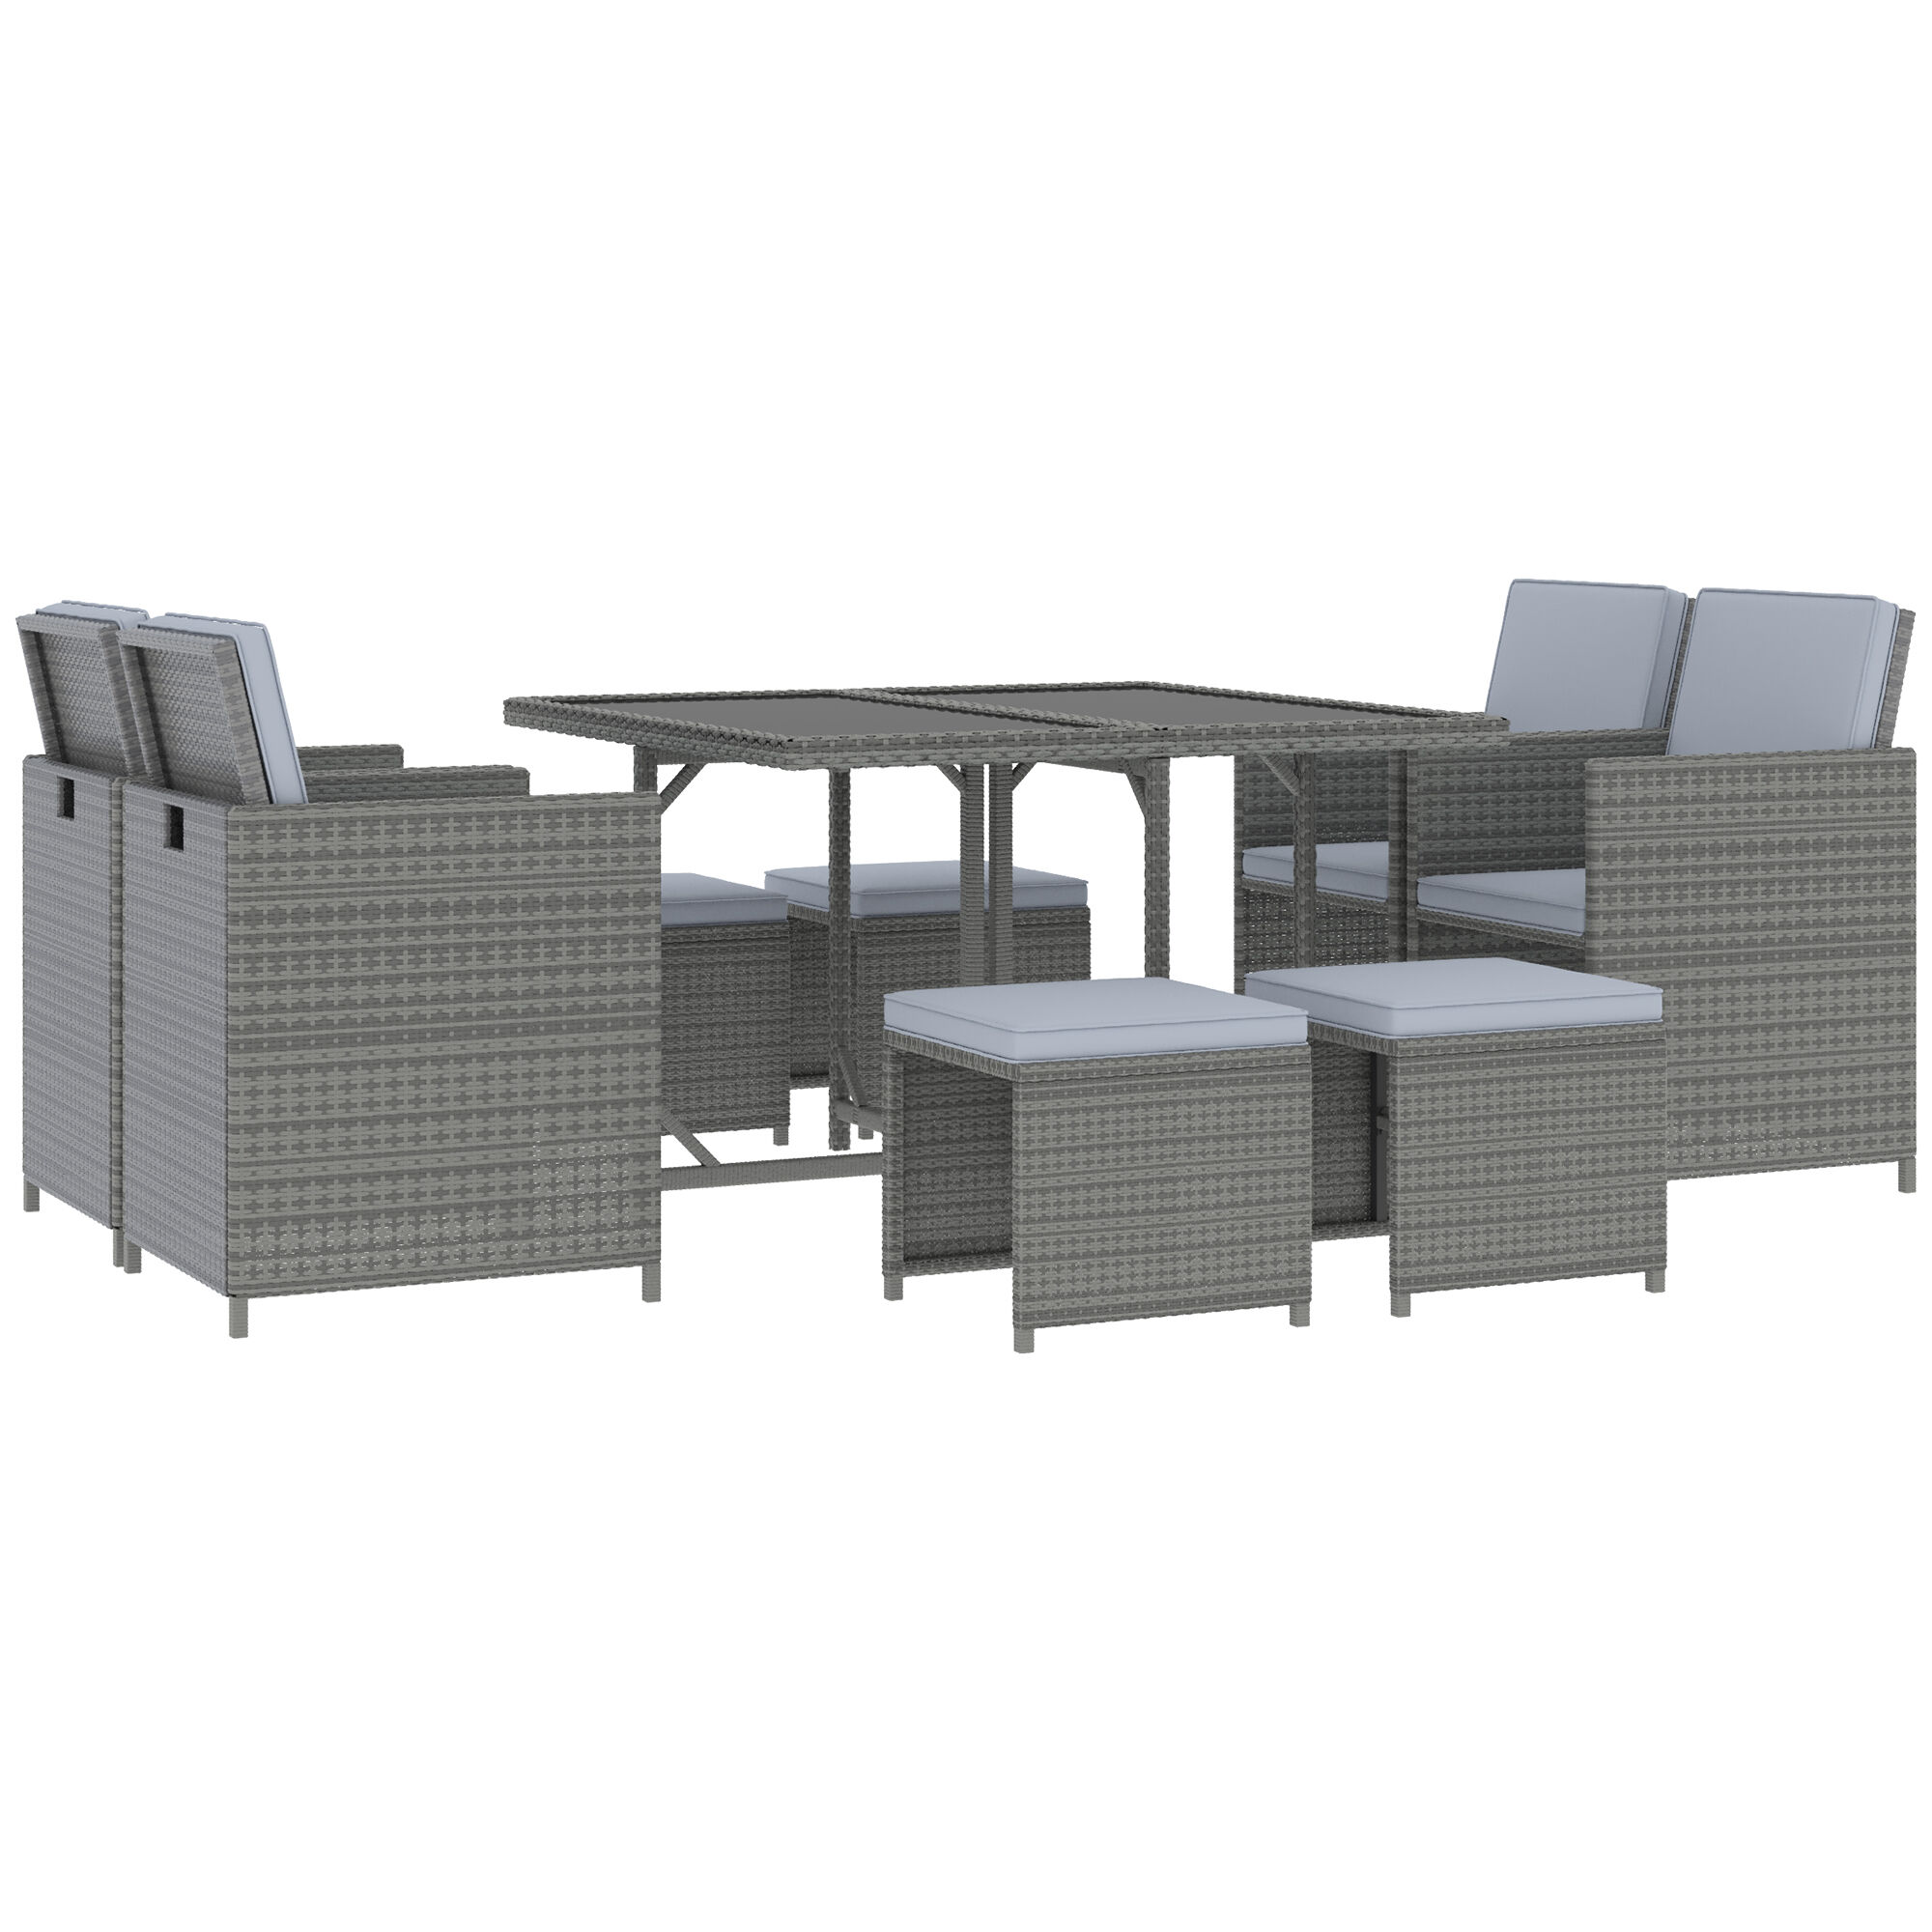 Outsunny 9 Piece Outdoor Rattan Wicker Dining Table and Chairs Furniture Set Space Saving Wicker Chairs w/ Cushions Grey